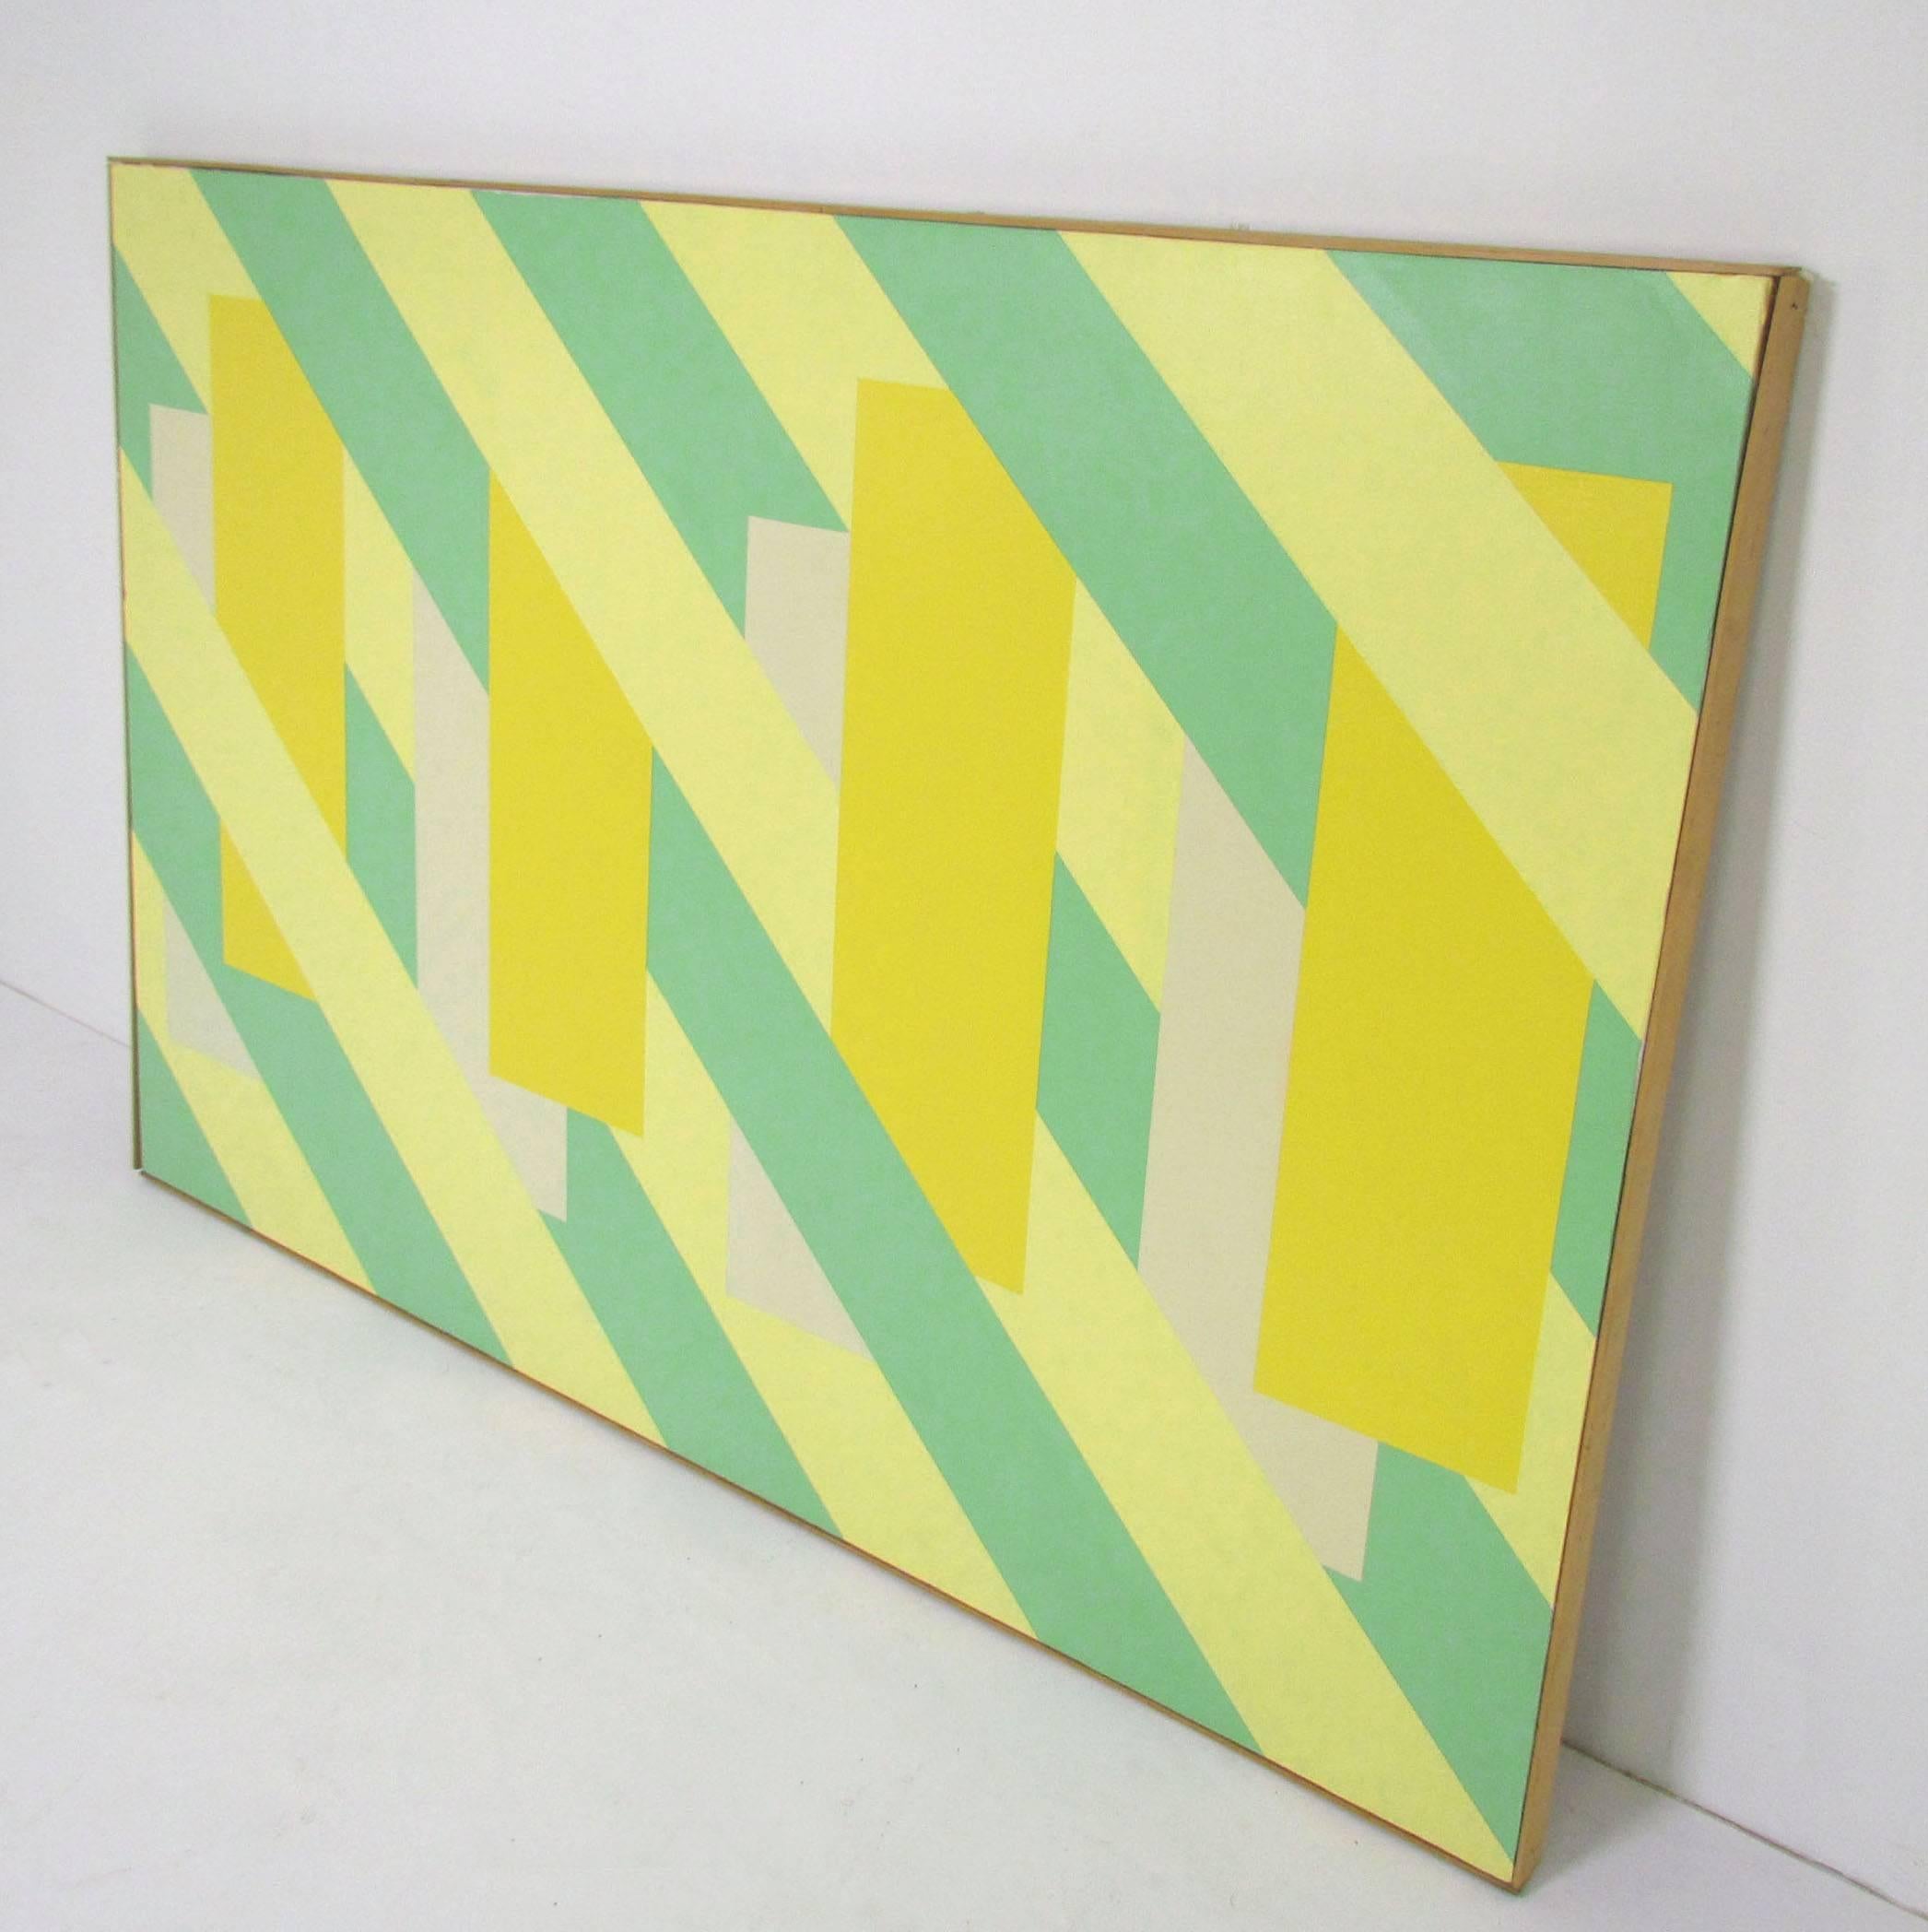 Large 4’ x 6’ color field abstract painting on canvas signed P. Weinfeld and dated 1977, in a wood strip frame.